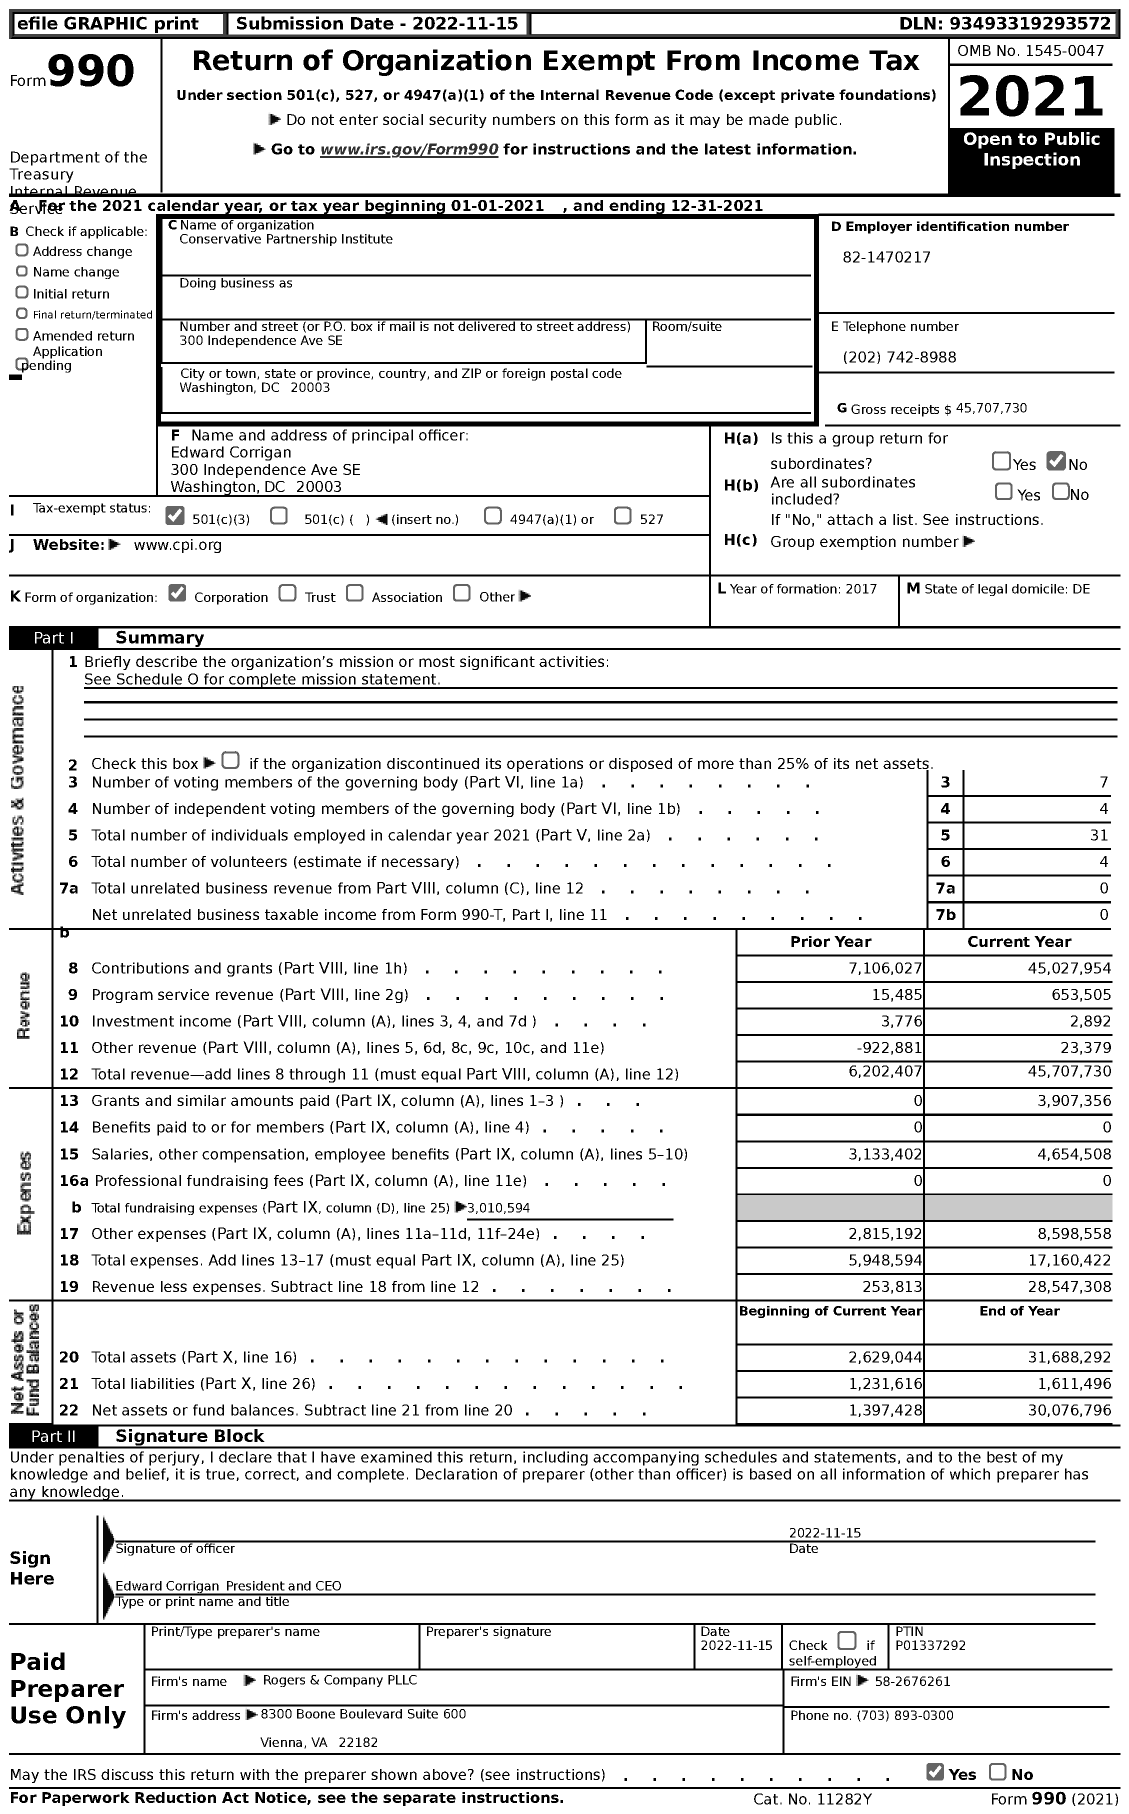 Image of first page of 2021 Form 990 for Conservative Partnership Institute